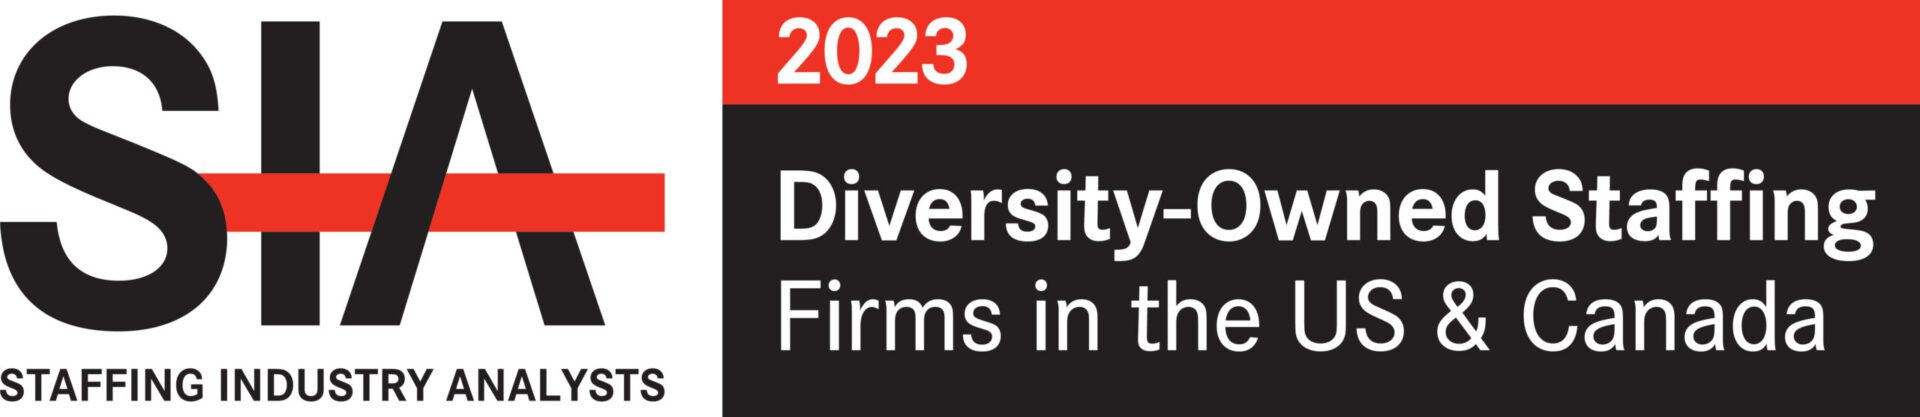 SIA 2023 Diversity Owned Staffing Firms